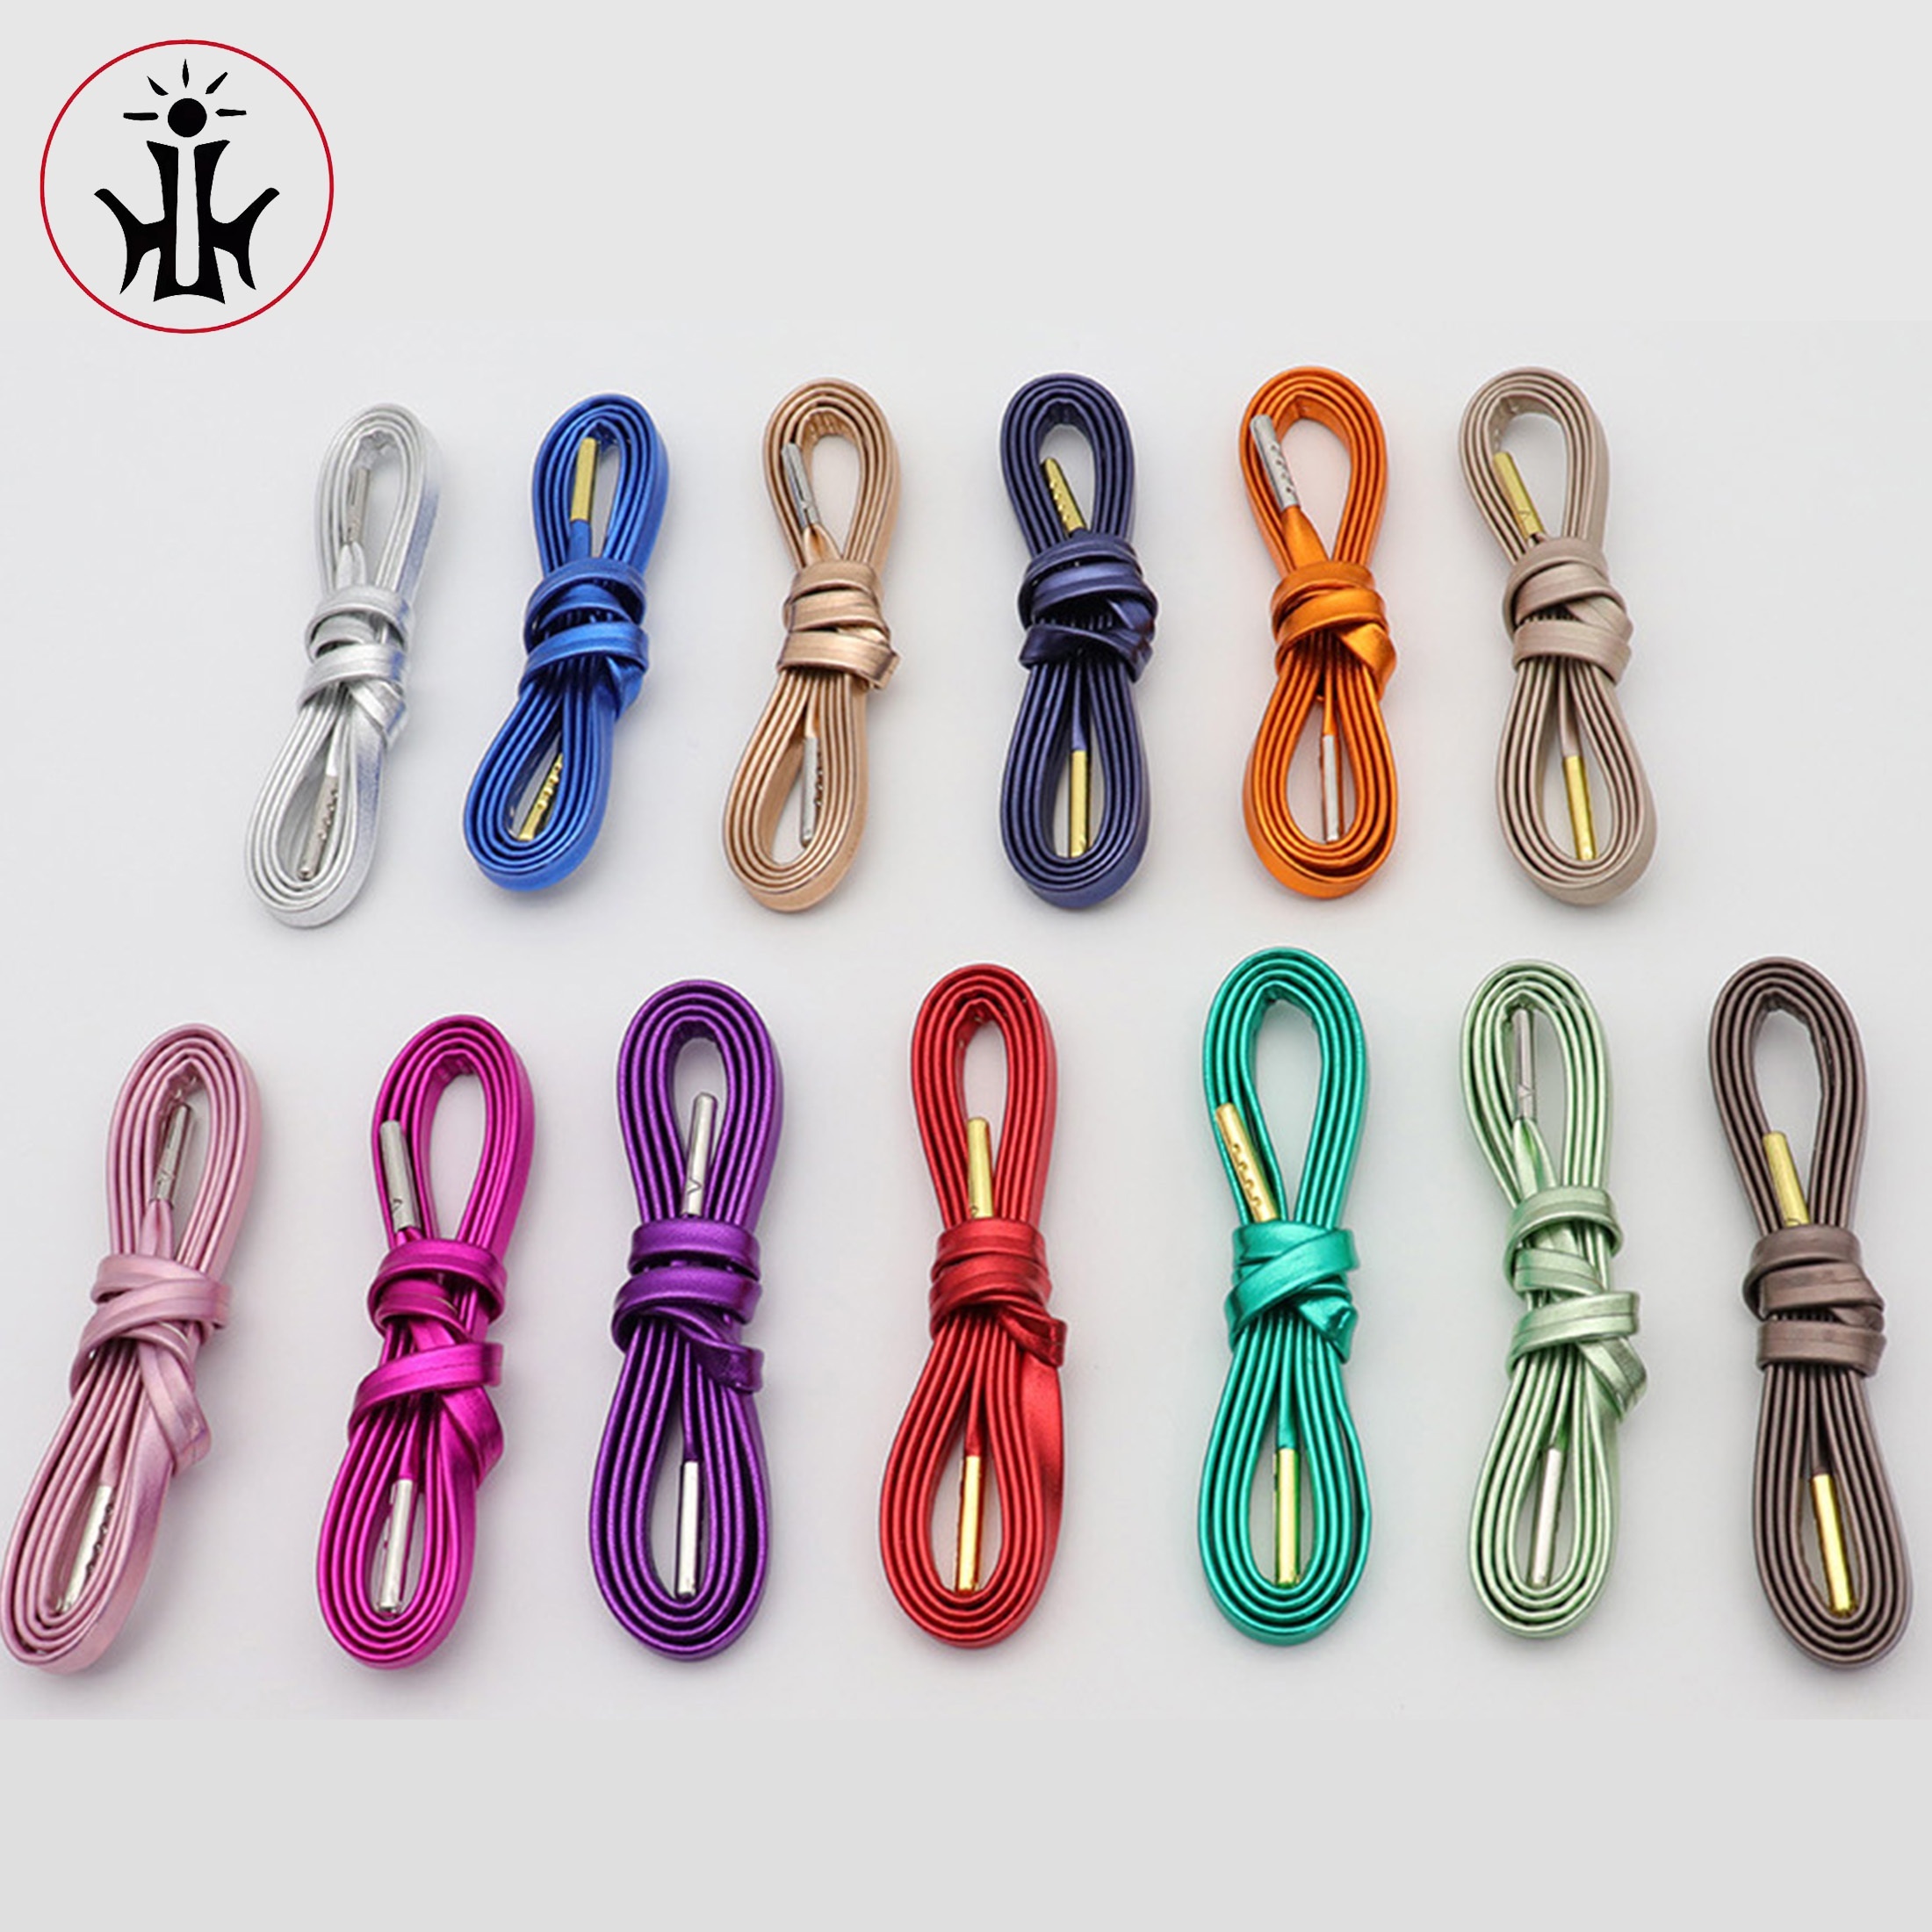 25 Pack Elastic Shoe Lace Ends Tips, Shoe String Cord End Caps, No Tie  Shoelace Locks For Sneakers, Assorted Zipper Pull Cord Ends